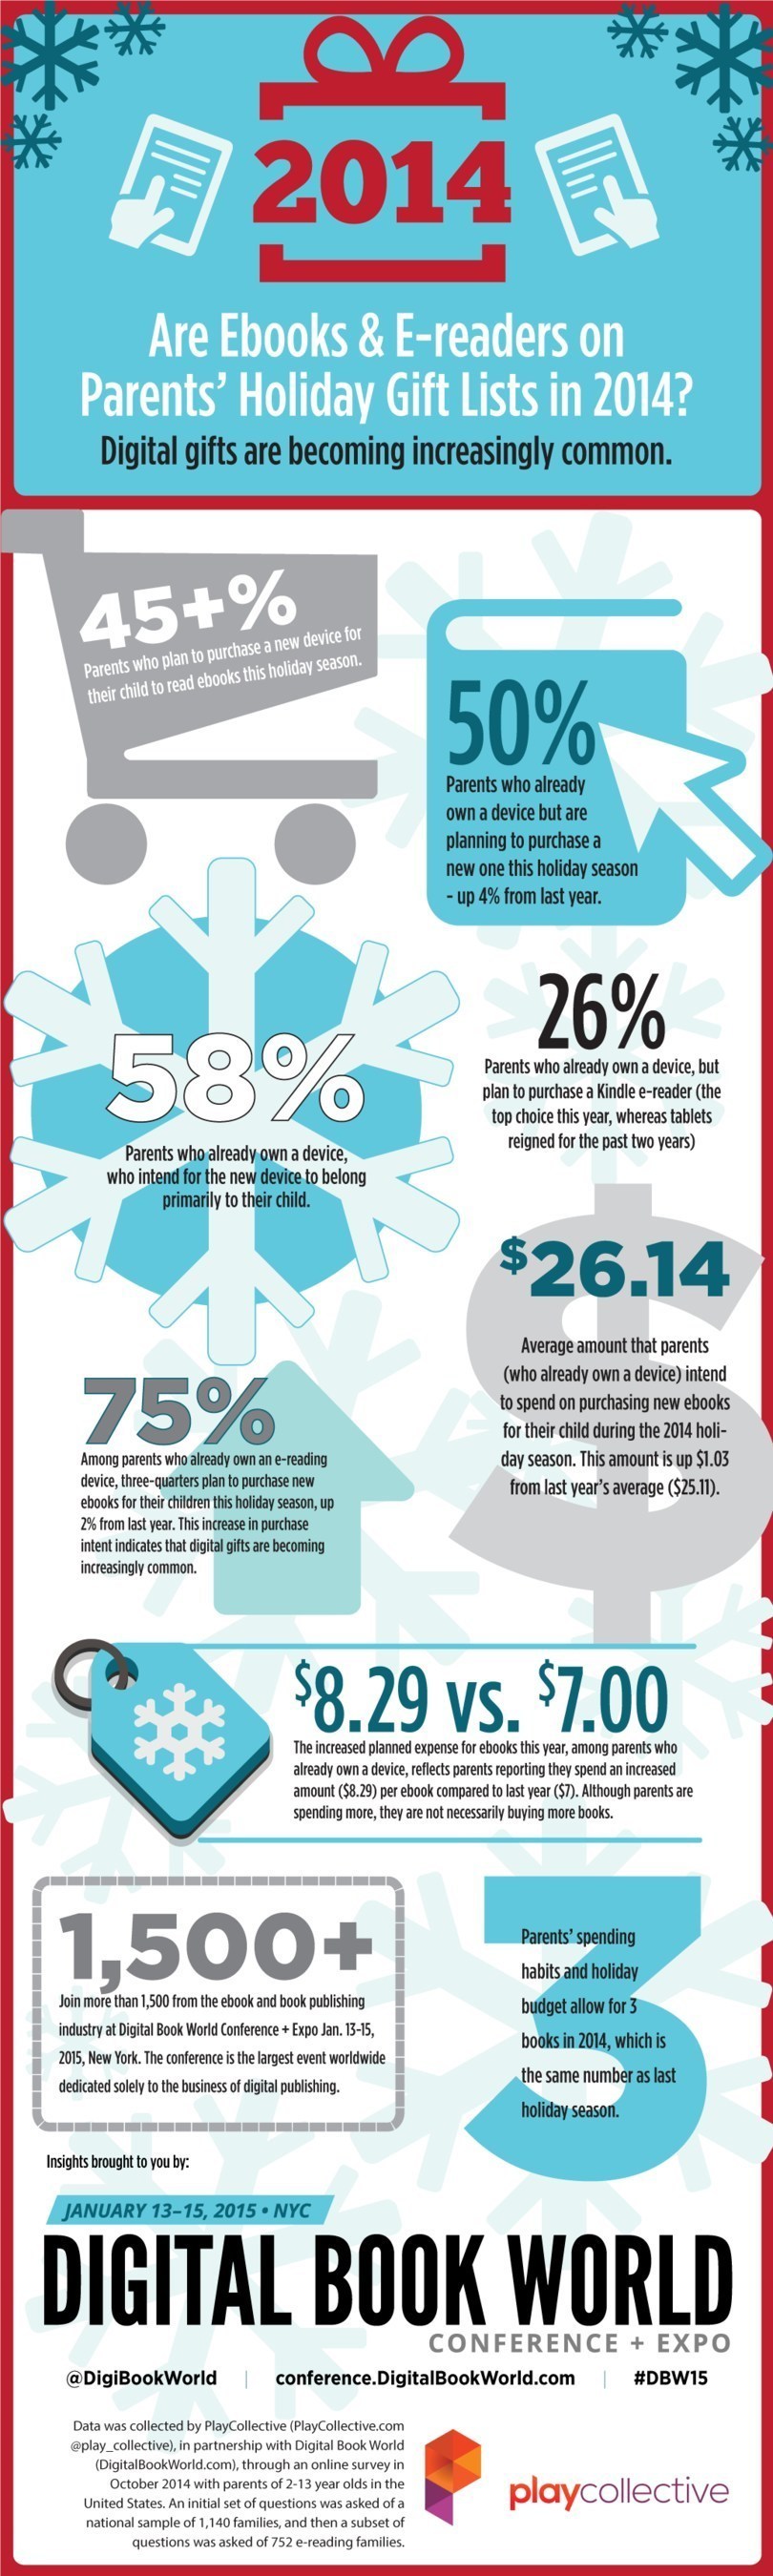 Infographic: Ebooks Are Hot During the 2014 Holiday Season, According to a Survey